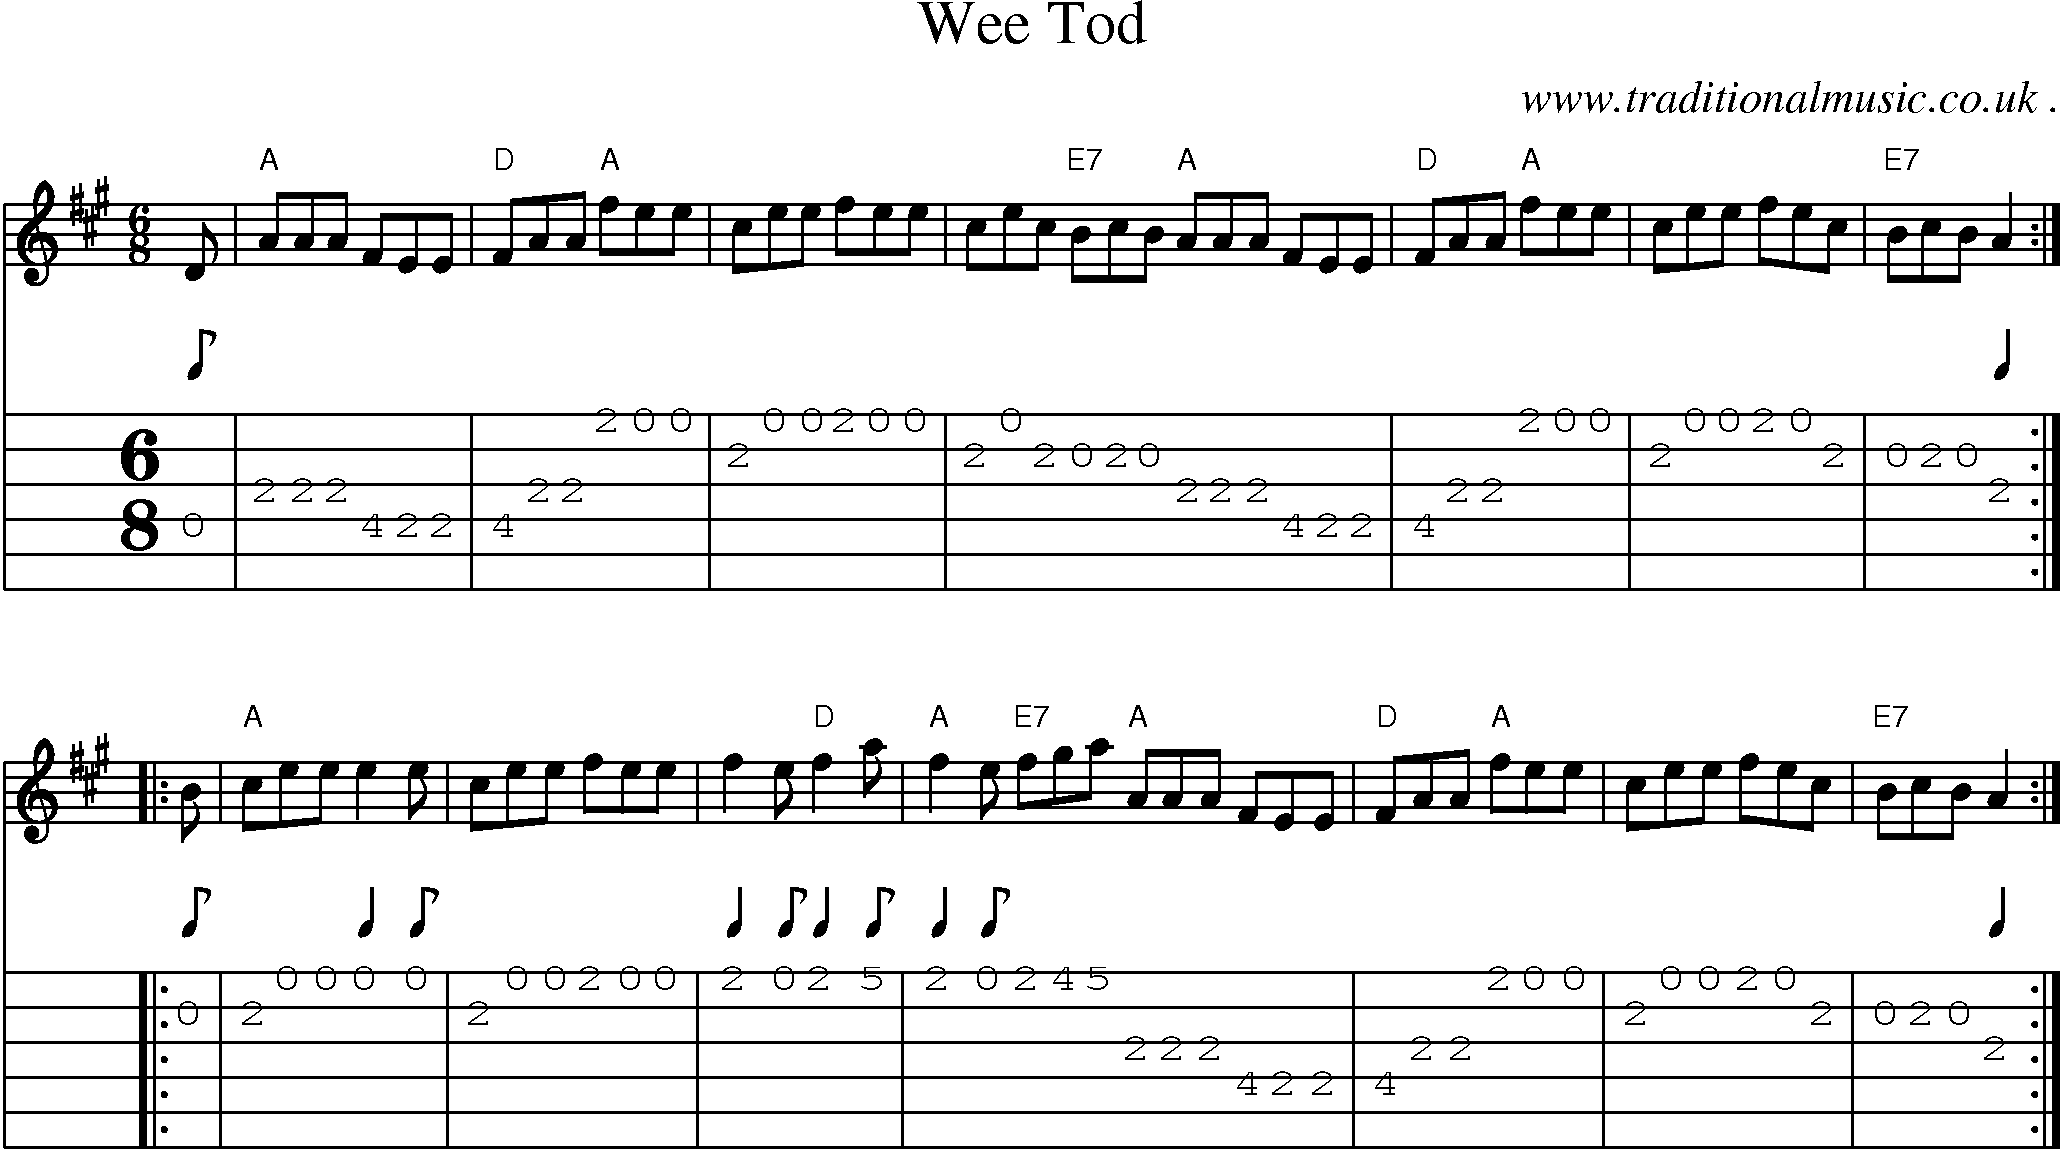 Sheet-music  score, Chords and Guitar Tabs for Wee Tod